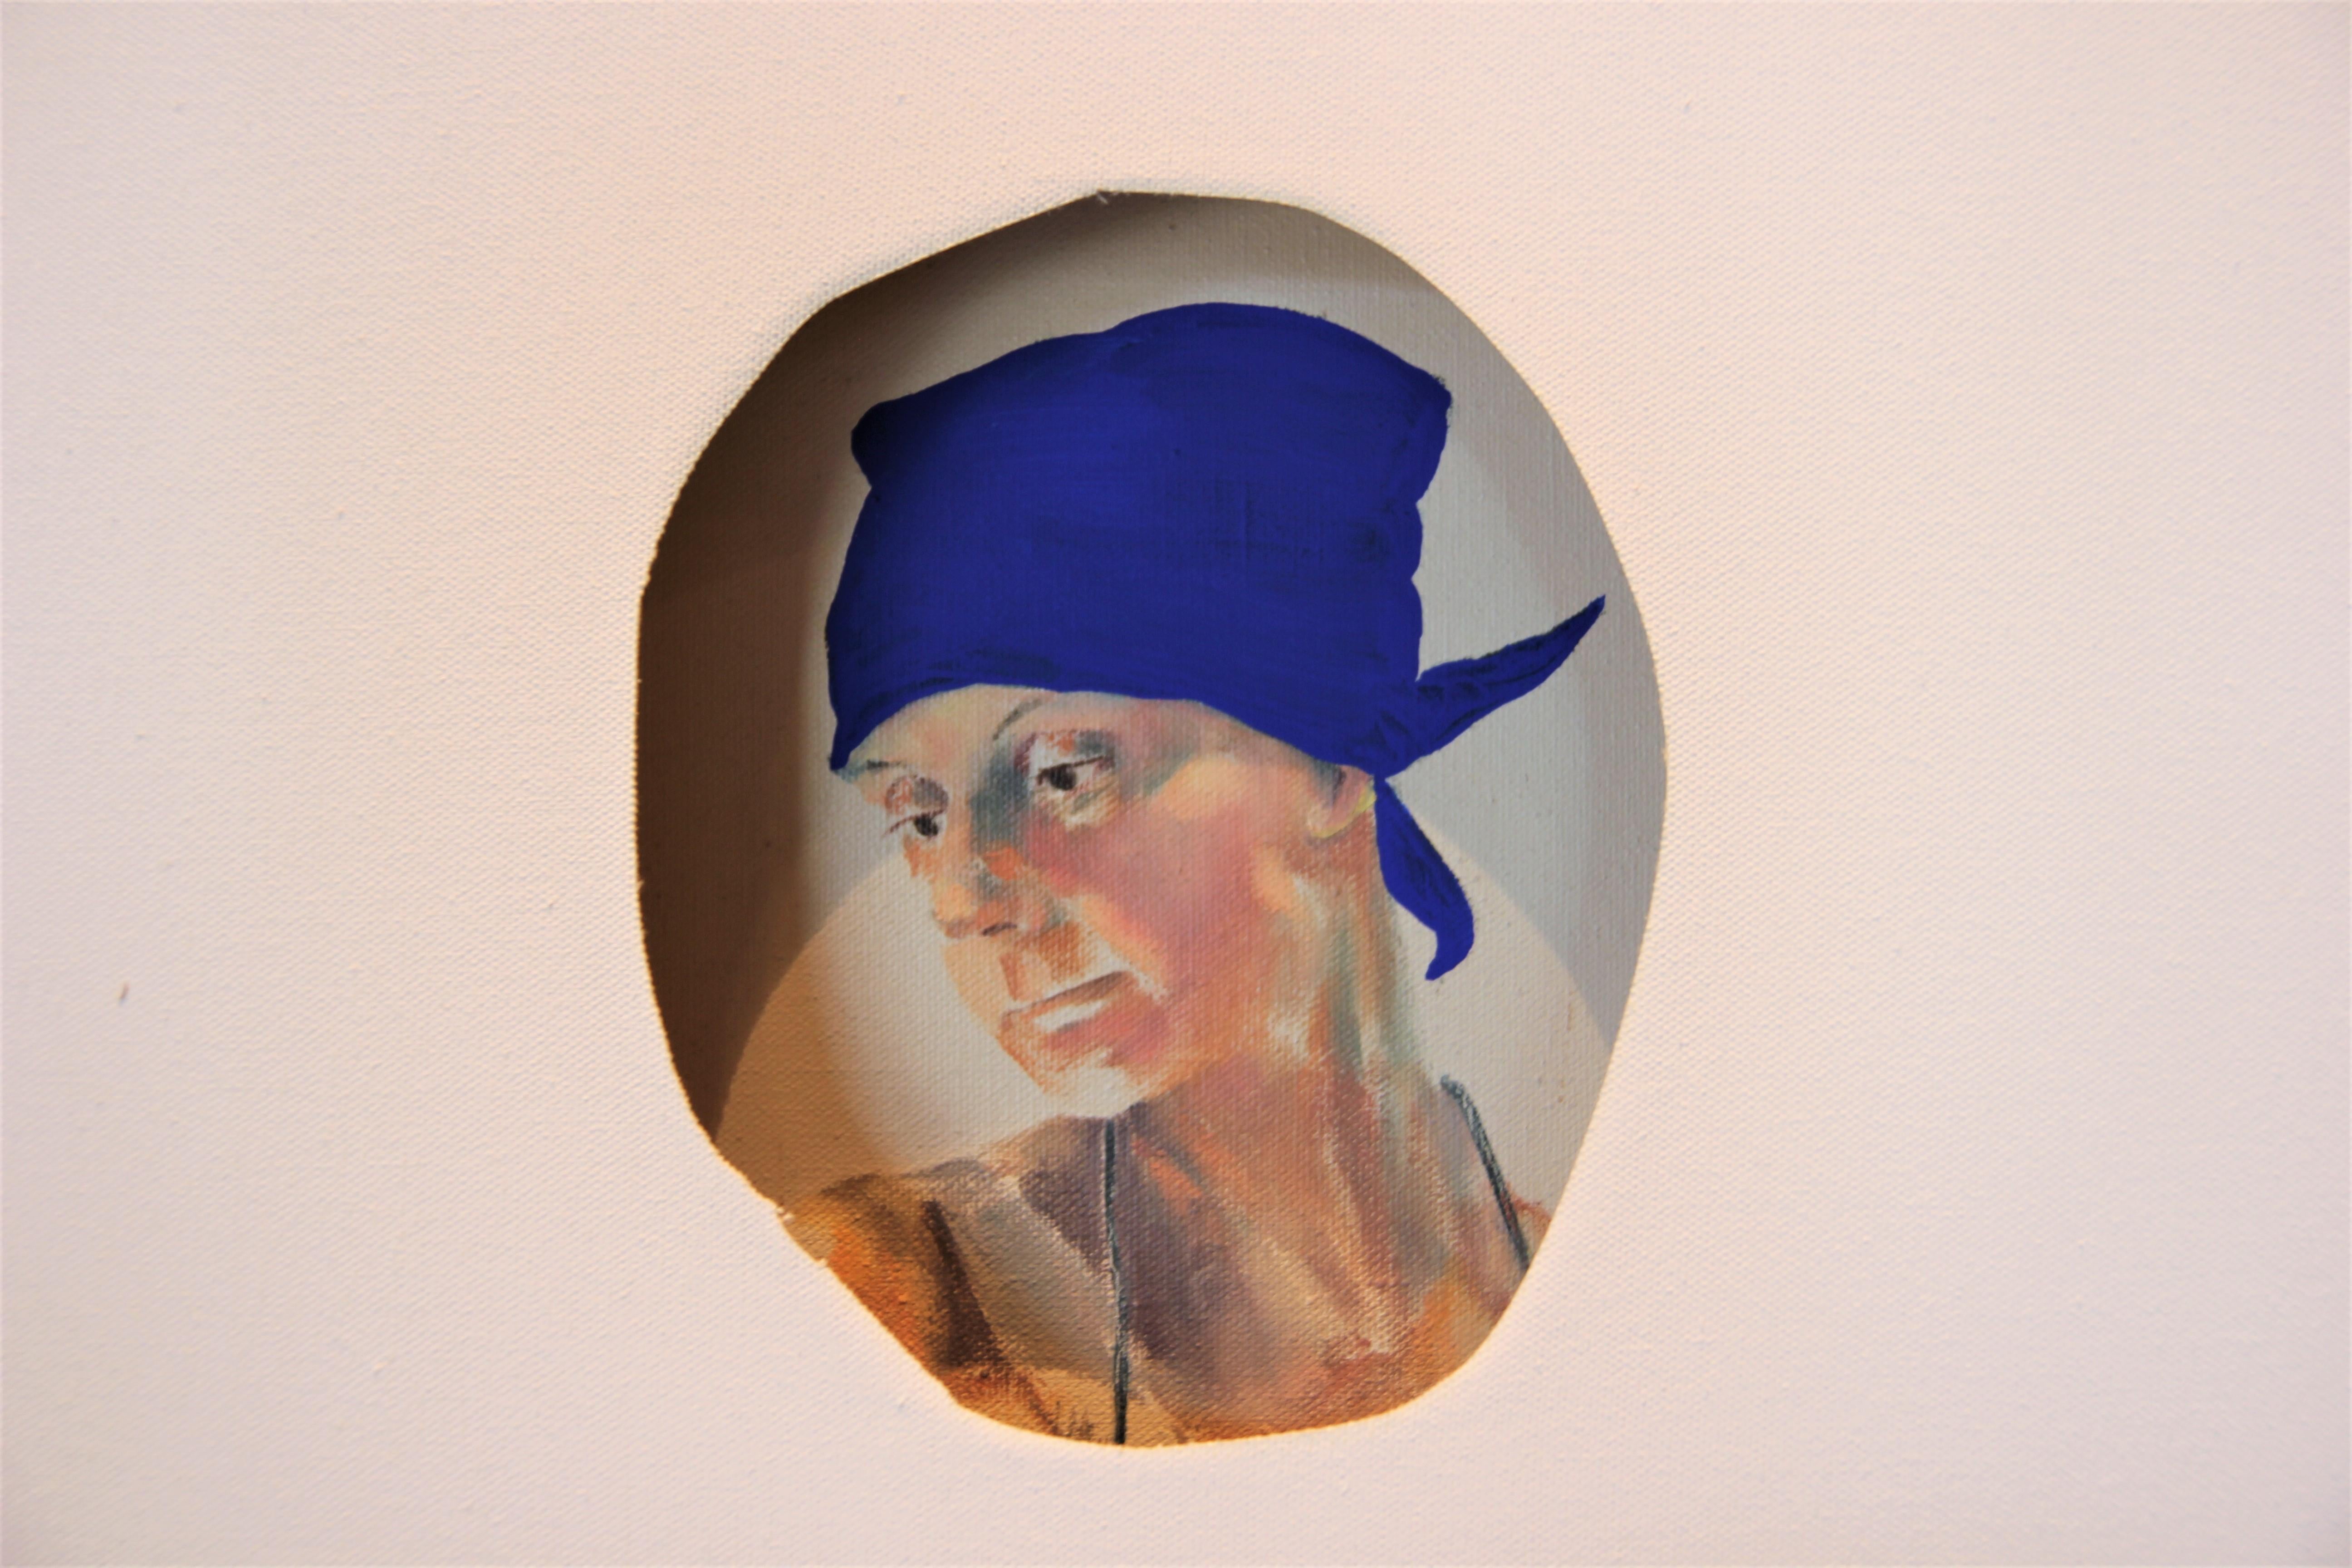 White Canvas Wrapped Portrait of a Woman with Bright Blue Handkerchief - Contemporary Mixed Media Art by Matthew Reeves